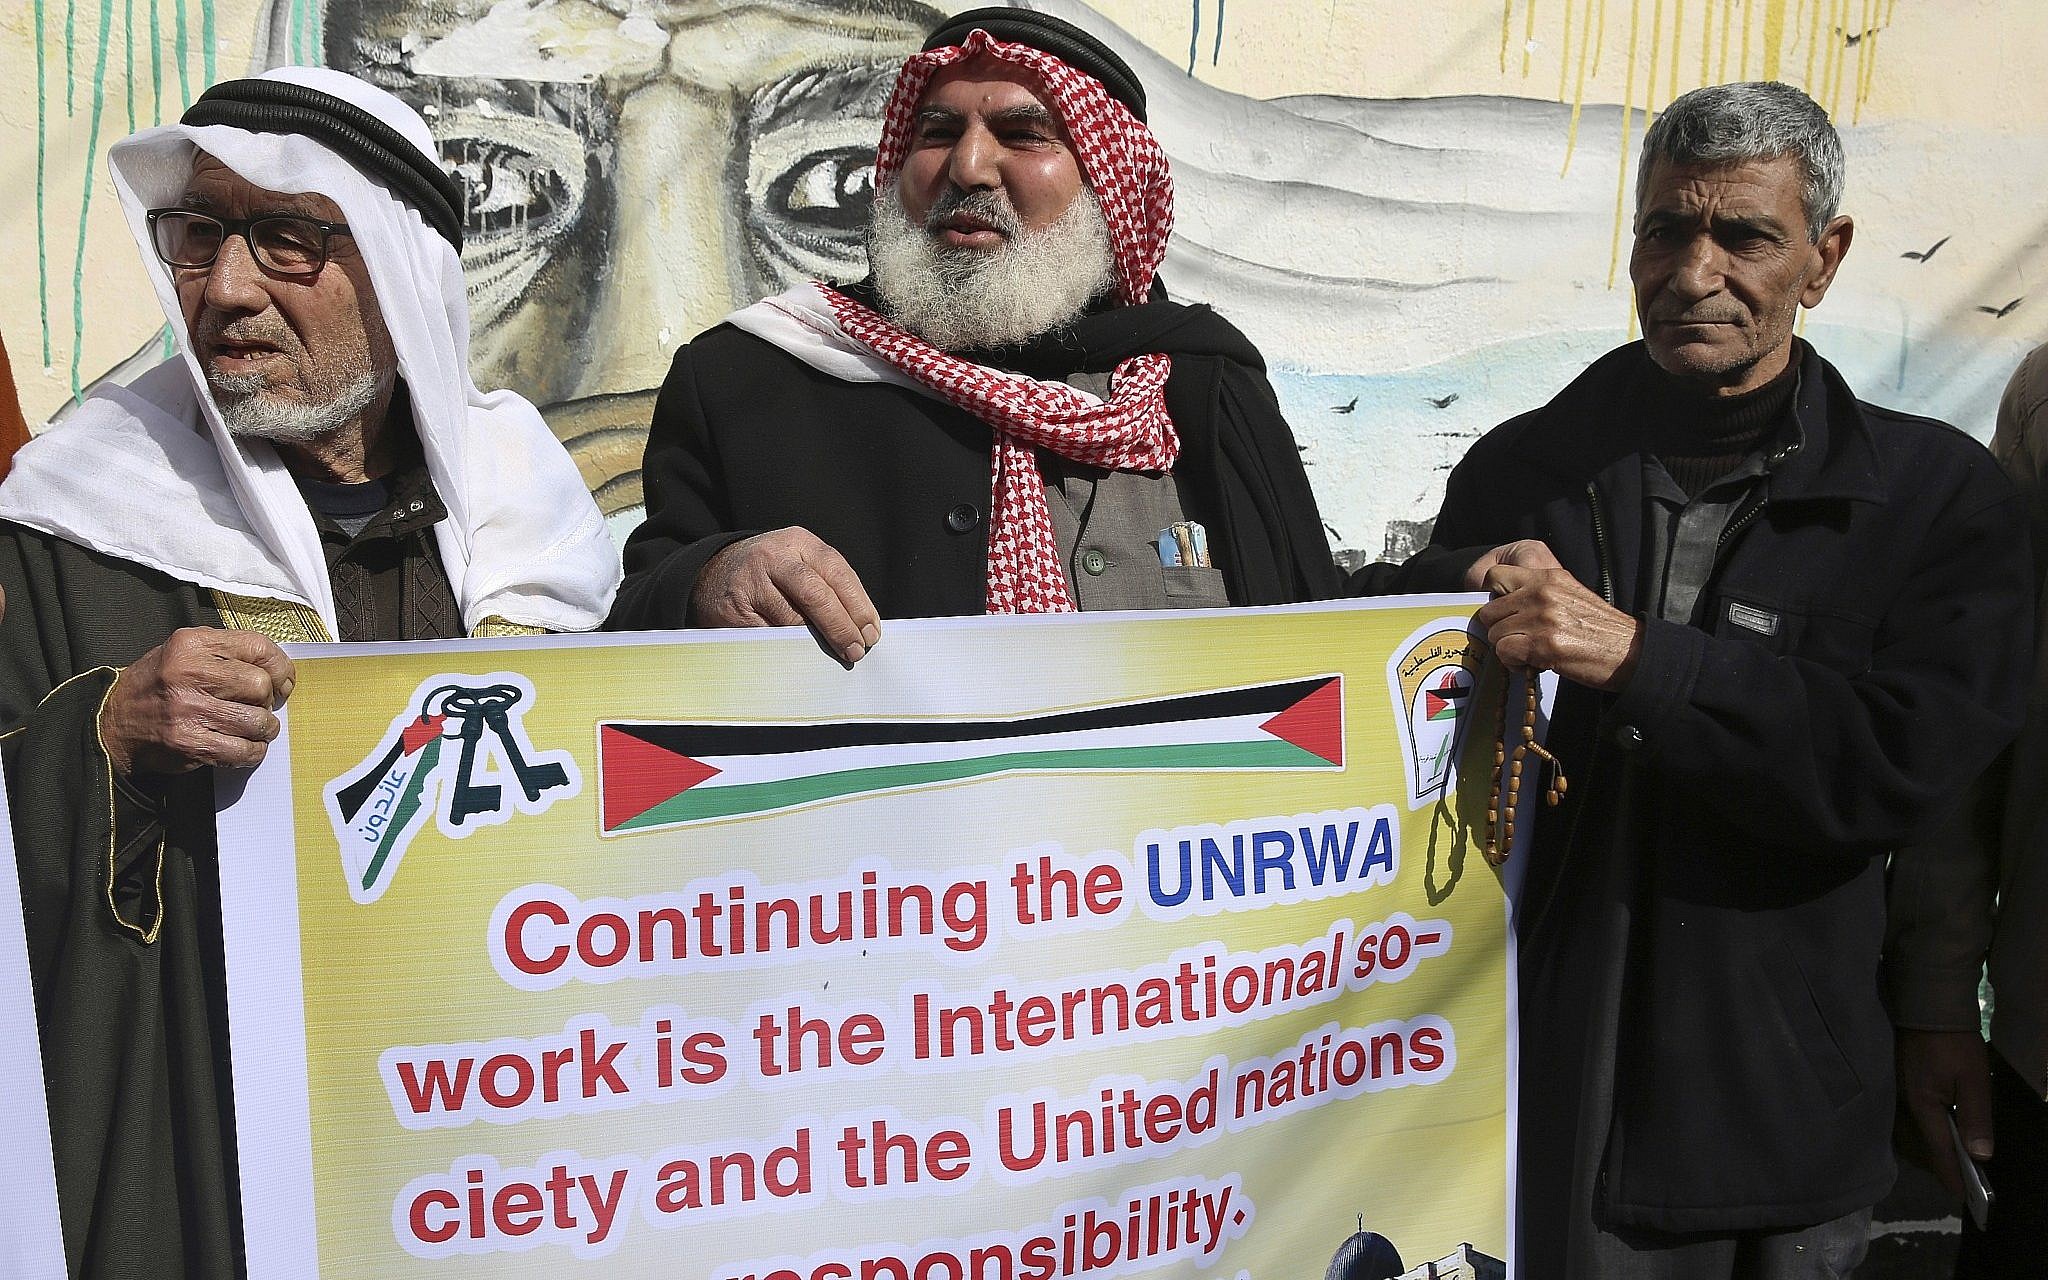 Israeli defense officials said to fear UNRWA cuts may strengthen Hamas